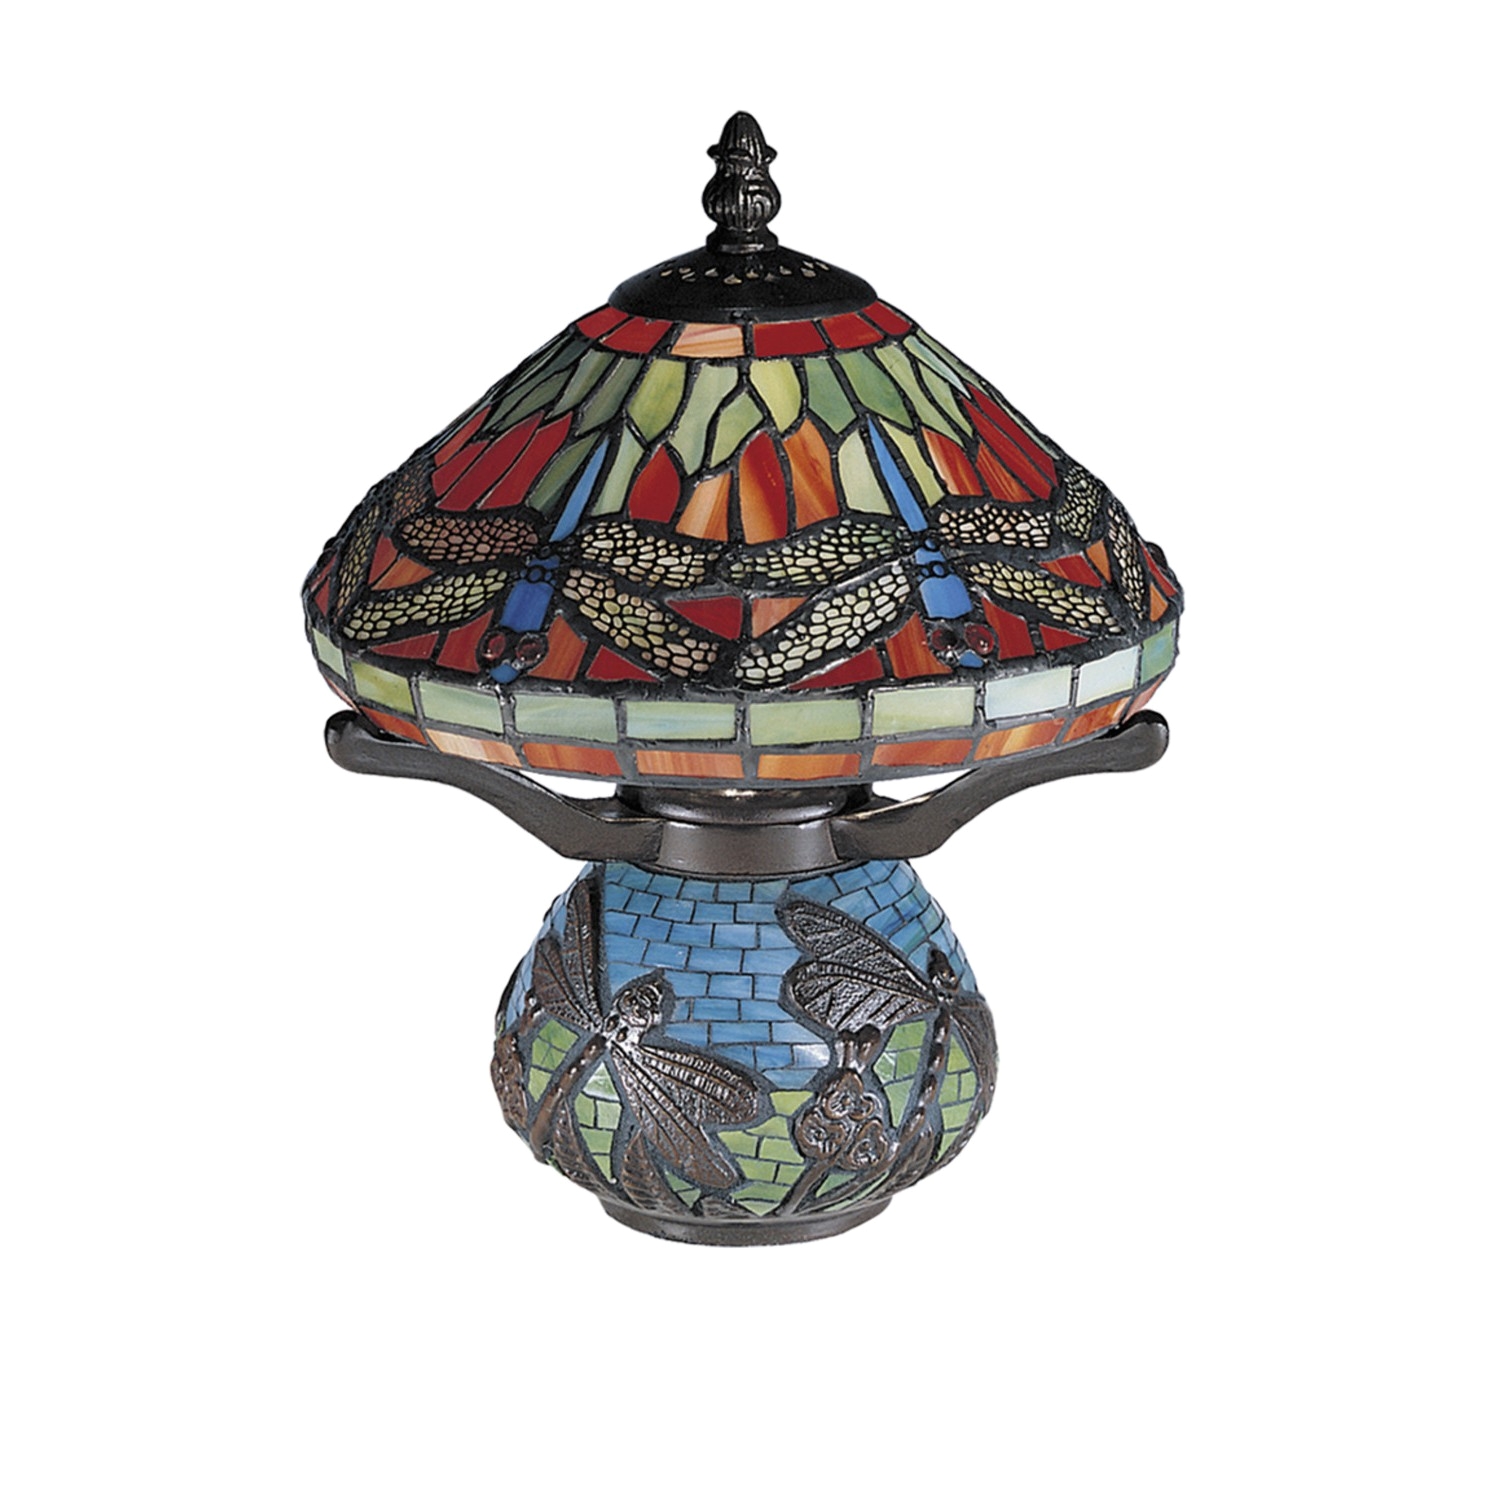 Jcpenney Dale Tiffany Lamps Jcpenney Tiffany Lamps 5425